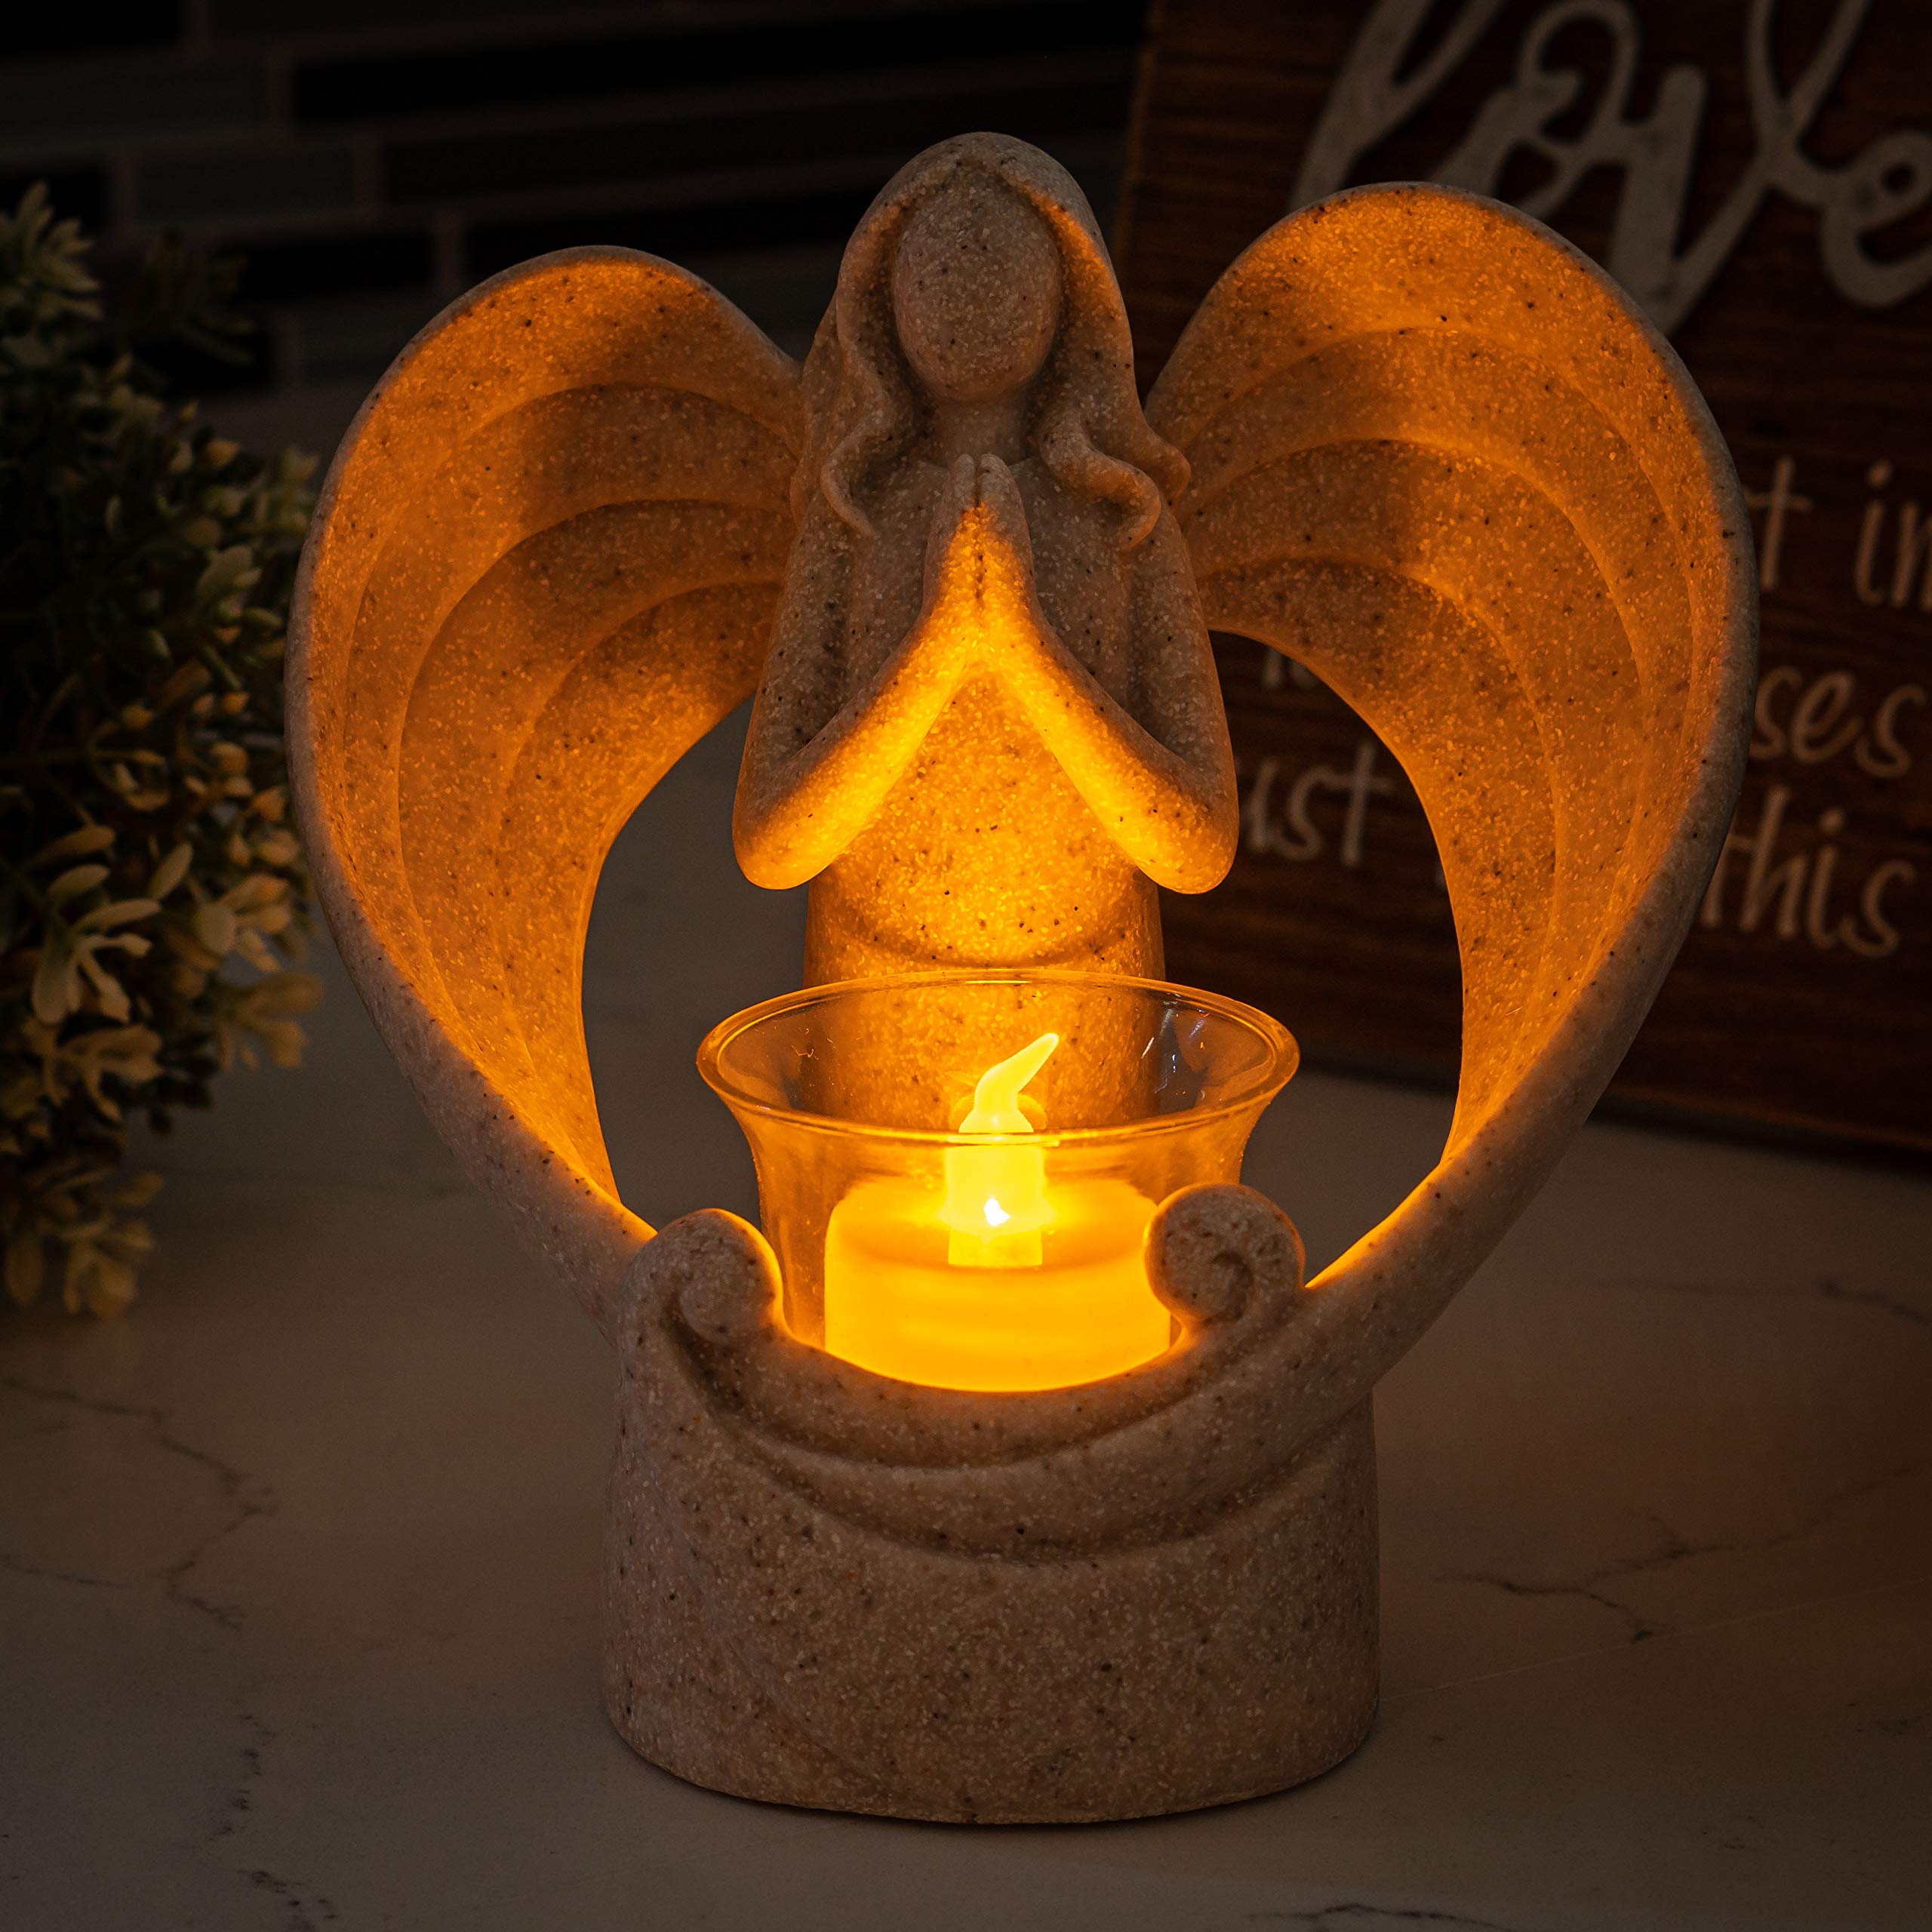 Angel Memorial Gifts Tealight Candle Holder, Sympathy Gift Candle